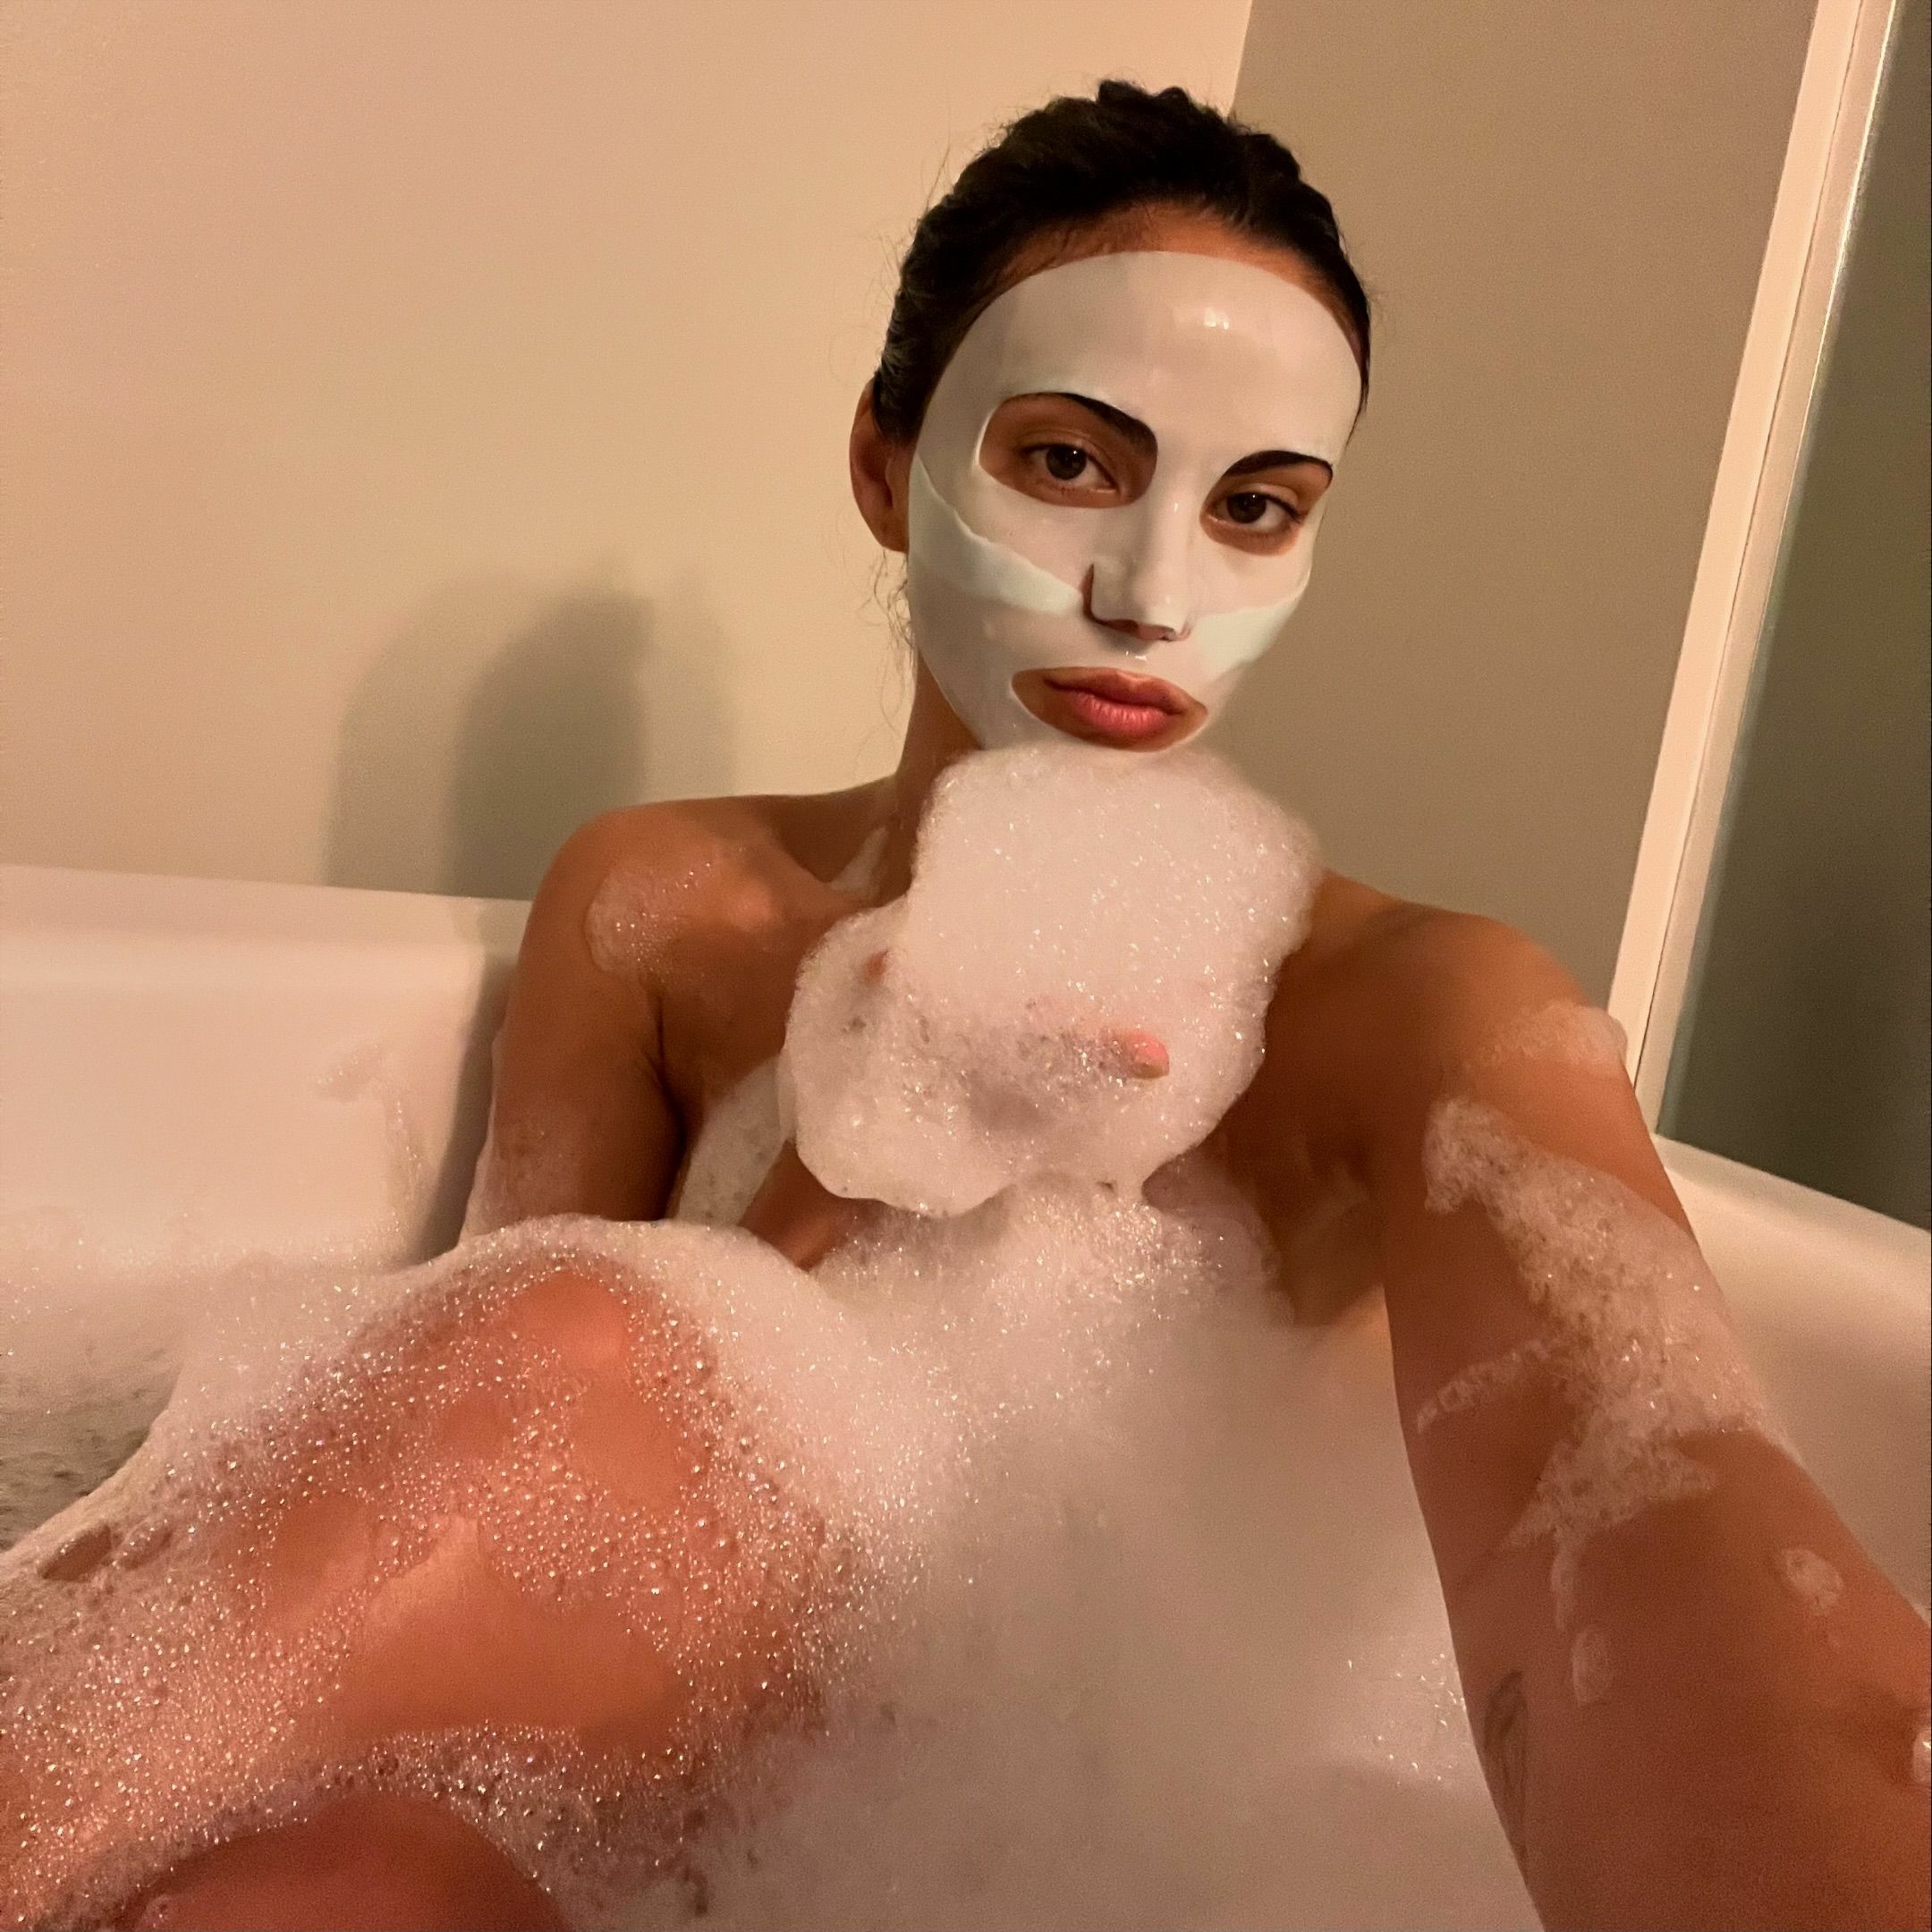 Photos n°1 : Camila Mendes Gives us A Self Care Selfie!